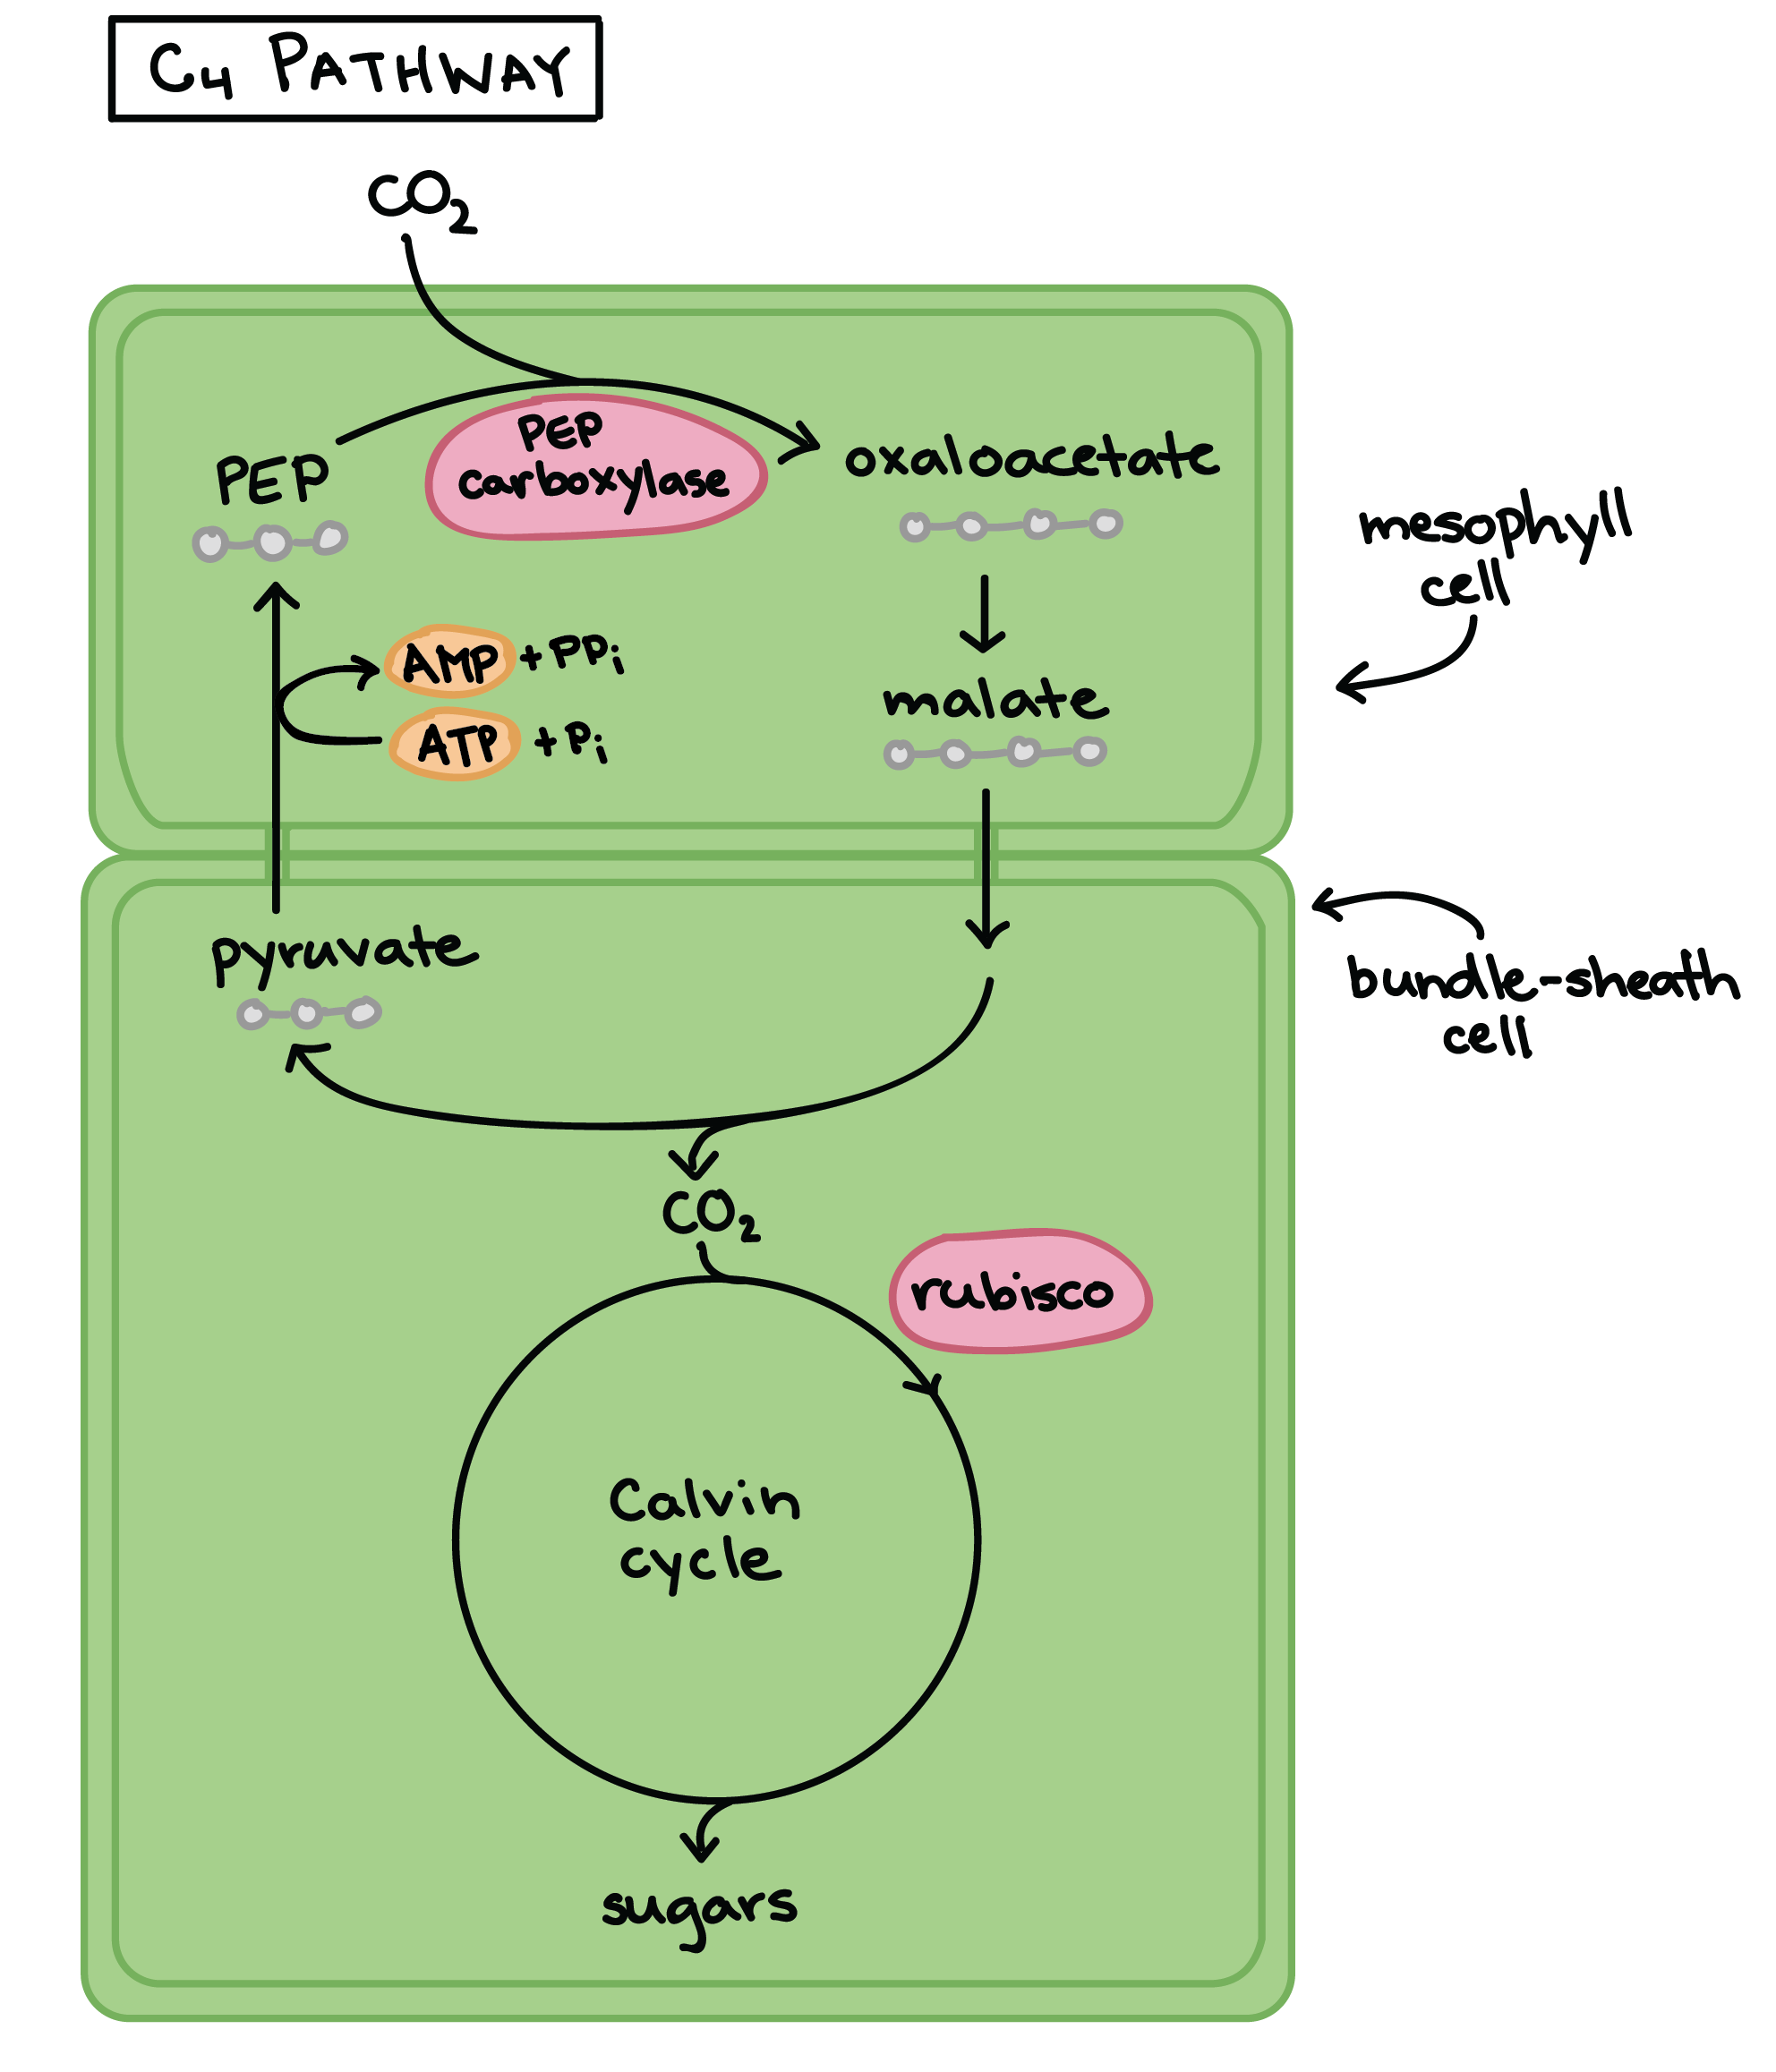 Image of the c4 pathway. Initial carbon fixation takes place in mesophyll cells and the Calvin cycle takes place in bundle-sheath cells. PEP carboxylase attaches an incoming carbon dioxide molecule to the three carbon-molecule PEP producing oxaloacetate, a four-carbon molecule. The oxaloacetate is converted to malate, which travels out of the mesophyll cell and into a neighboring bundle-sheath cell. Inside the bundle-sheath cell, the malate is broken down to release carbon dioxide, which then enters the Calvin cycle. Pyruvate is also produced in this step and moves back into the mesophyll cell, where it is converted into PEP, a reaction that converts ATP and Pi into AMP and PPi.